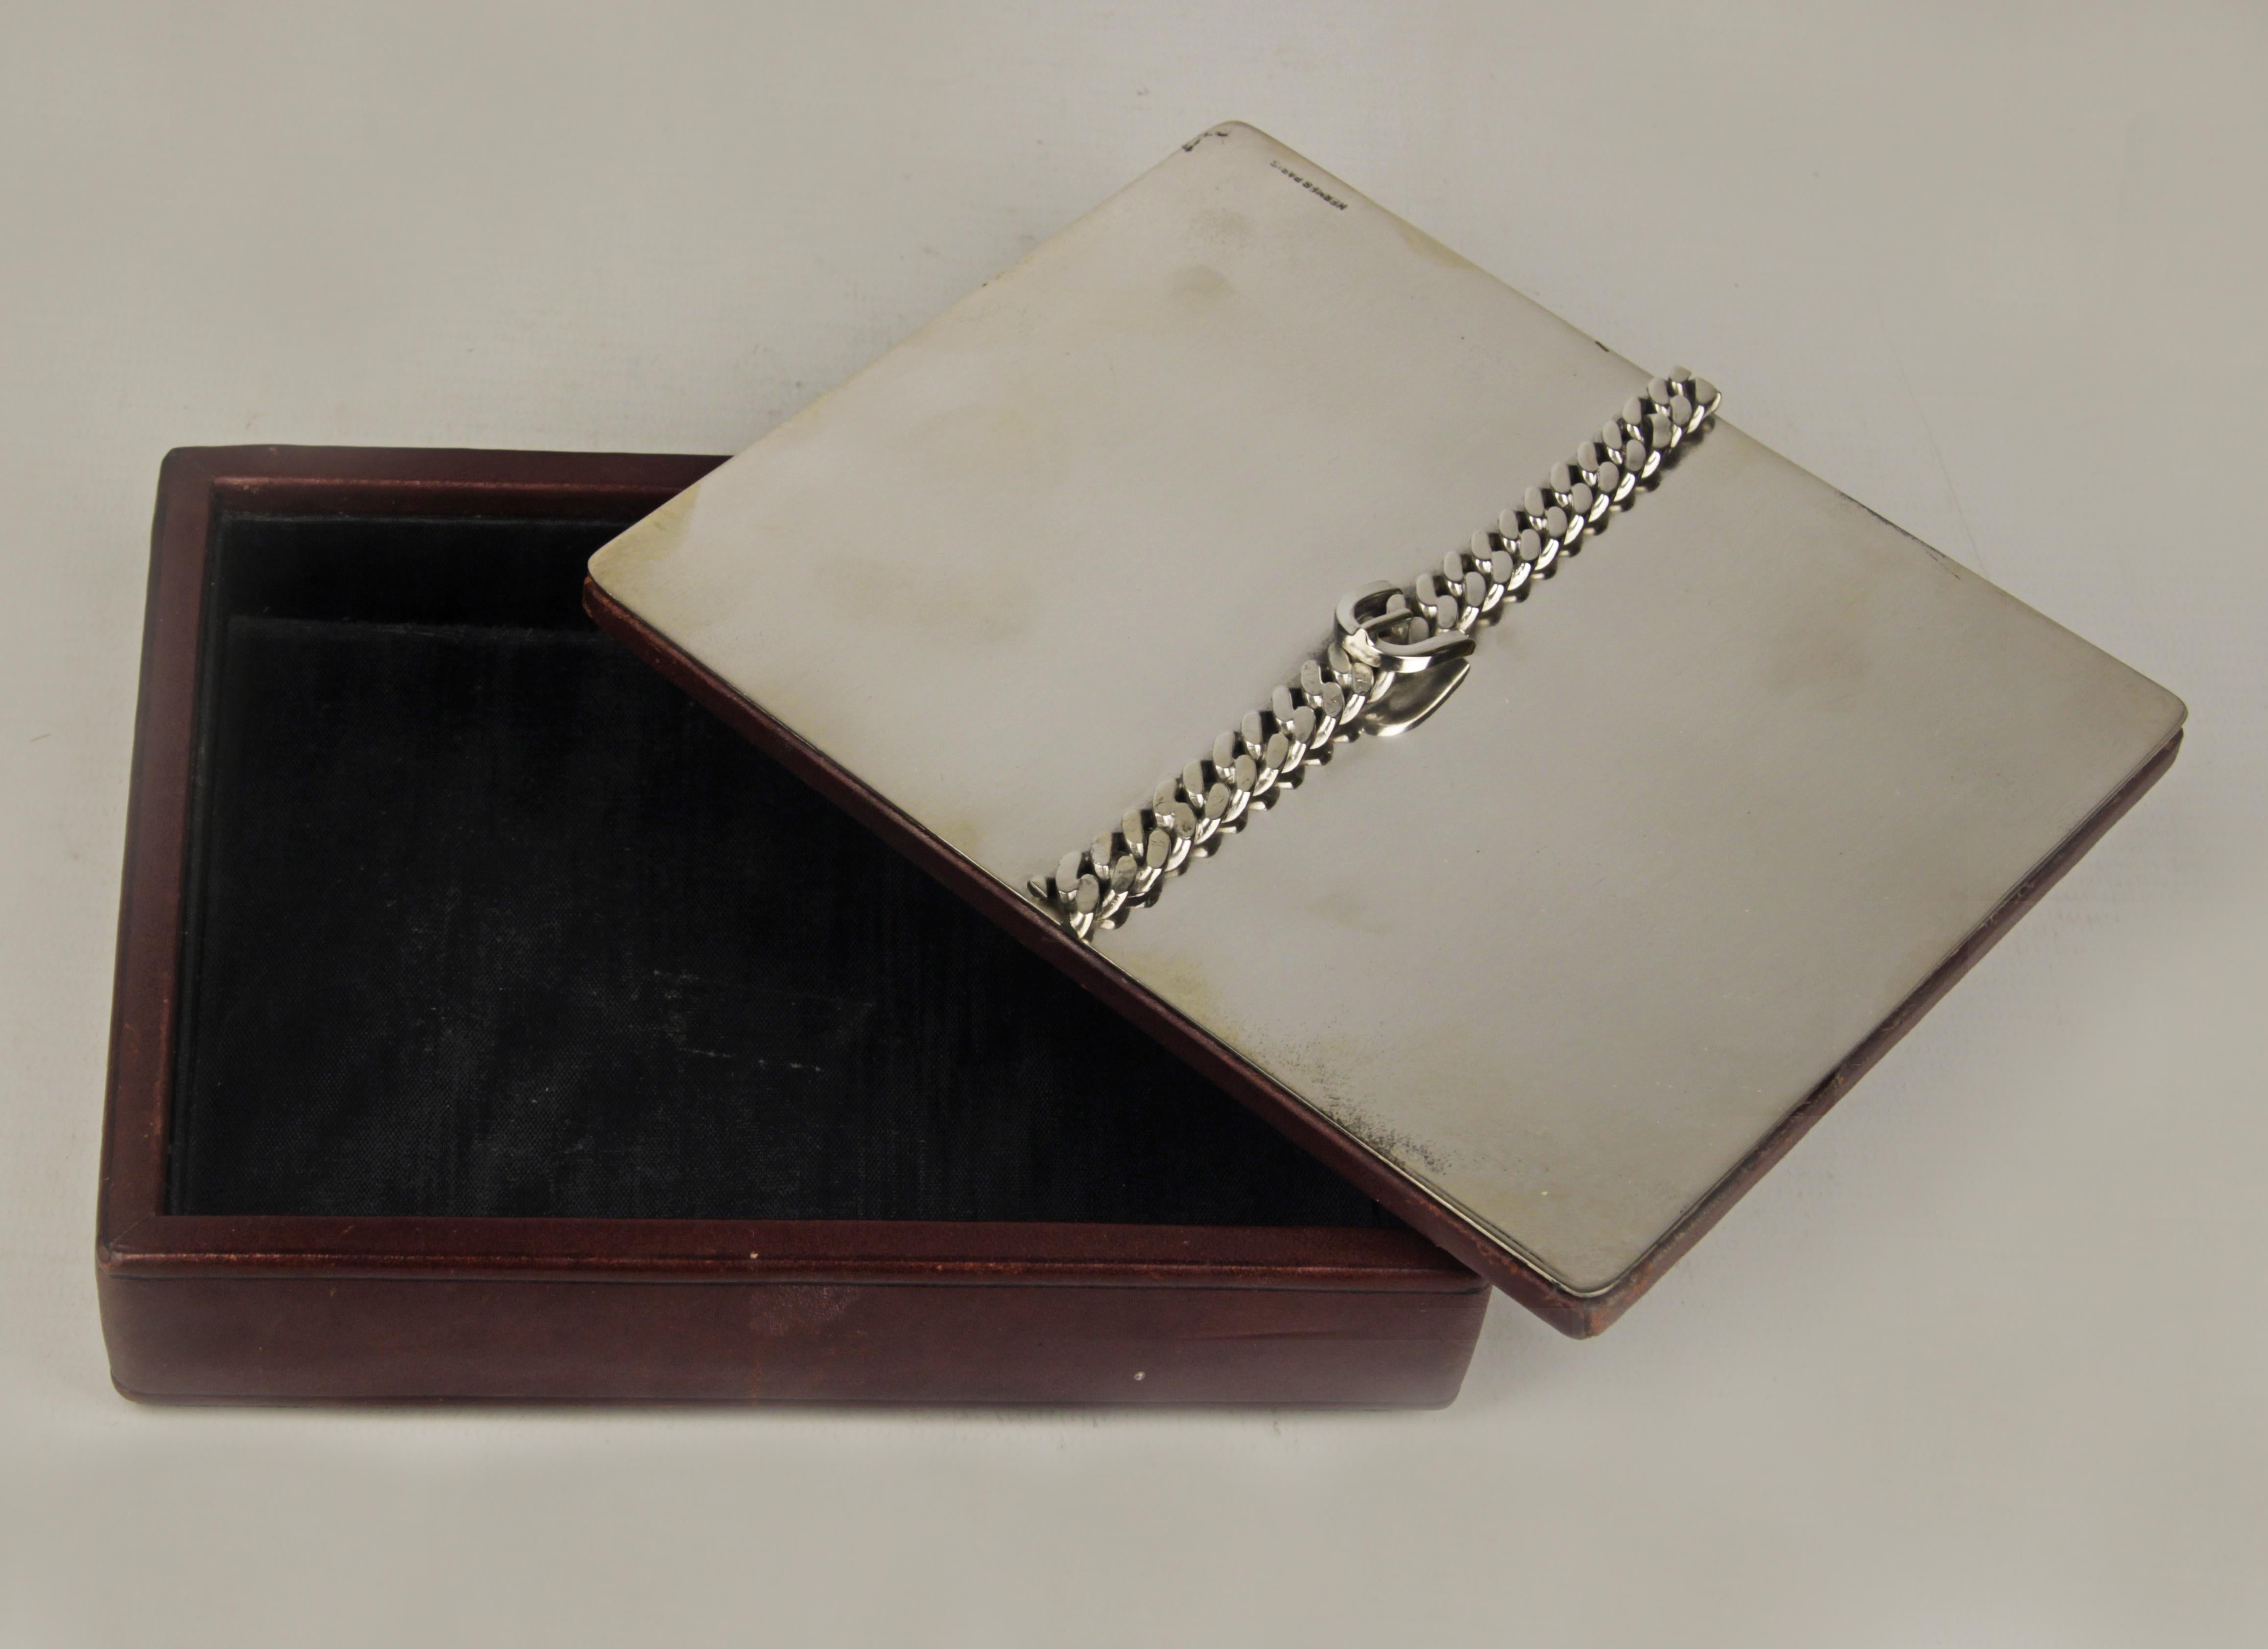 Mid-Century Modern Mid-20th Century Wooden Box with Silver Buckle Lid by French Brand Hermès Paris